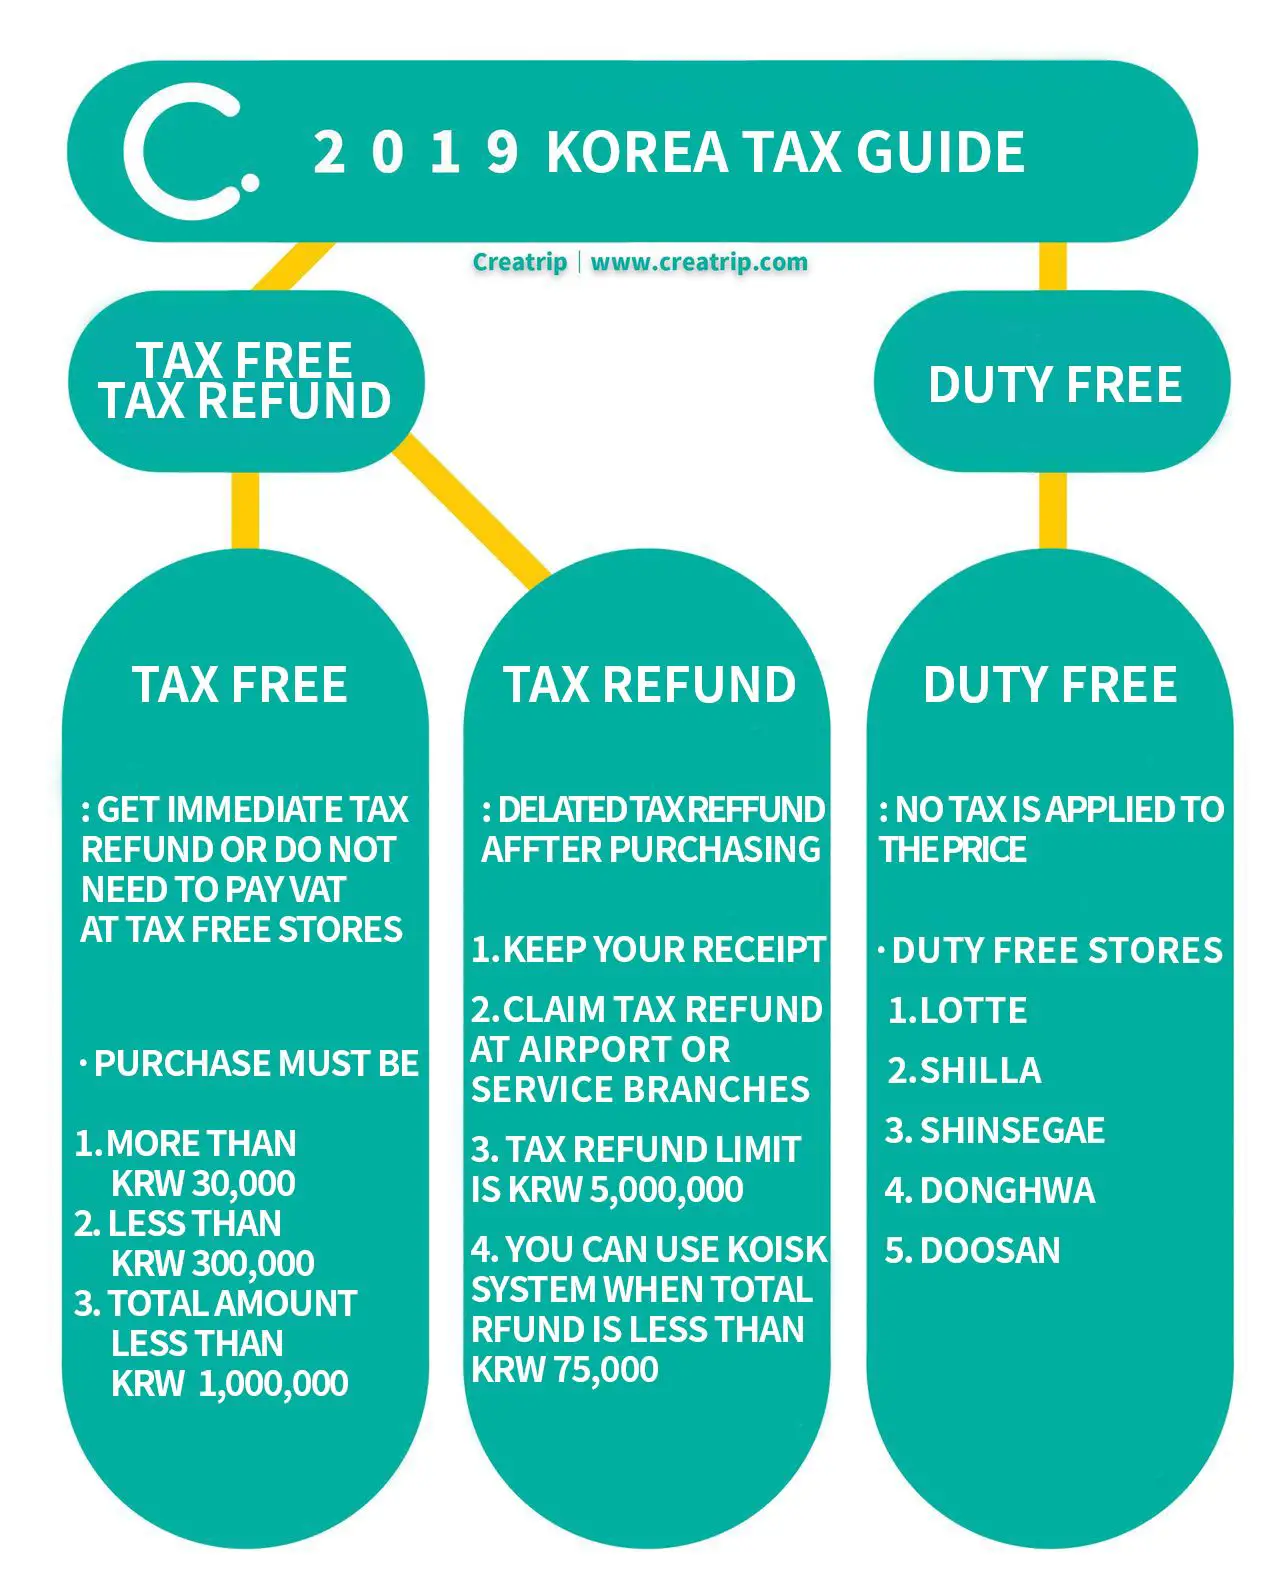 Creatrip: How to get a tax refund in Korea